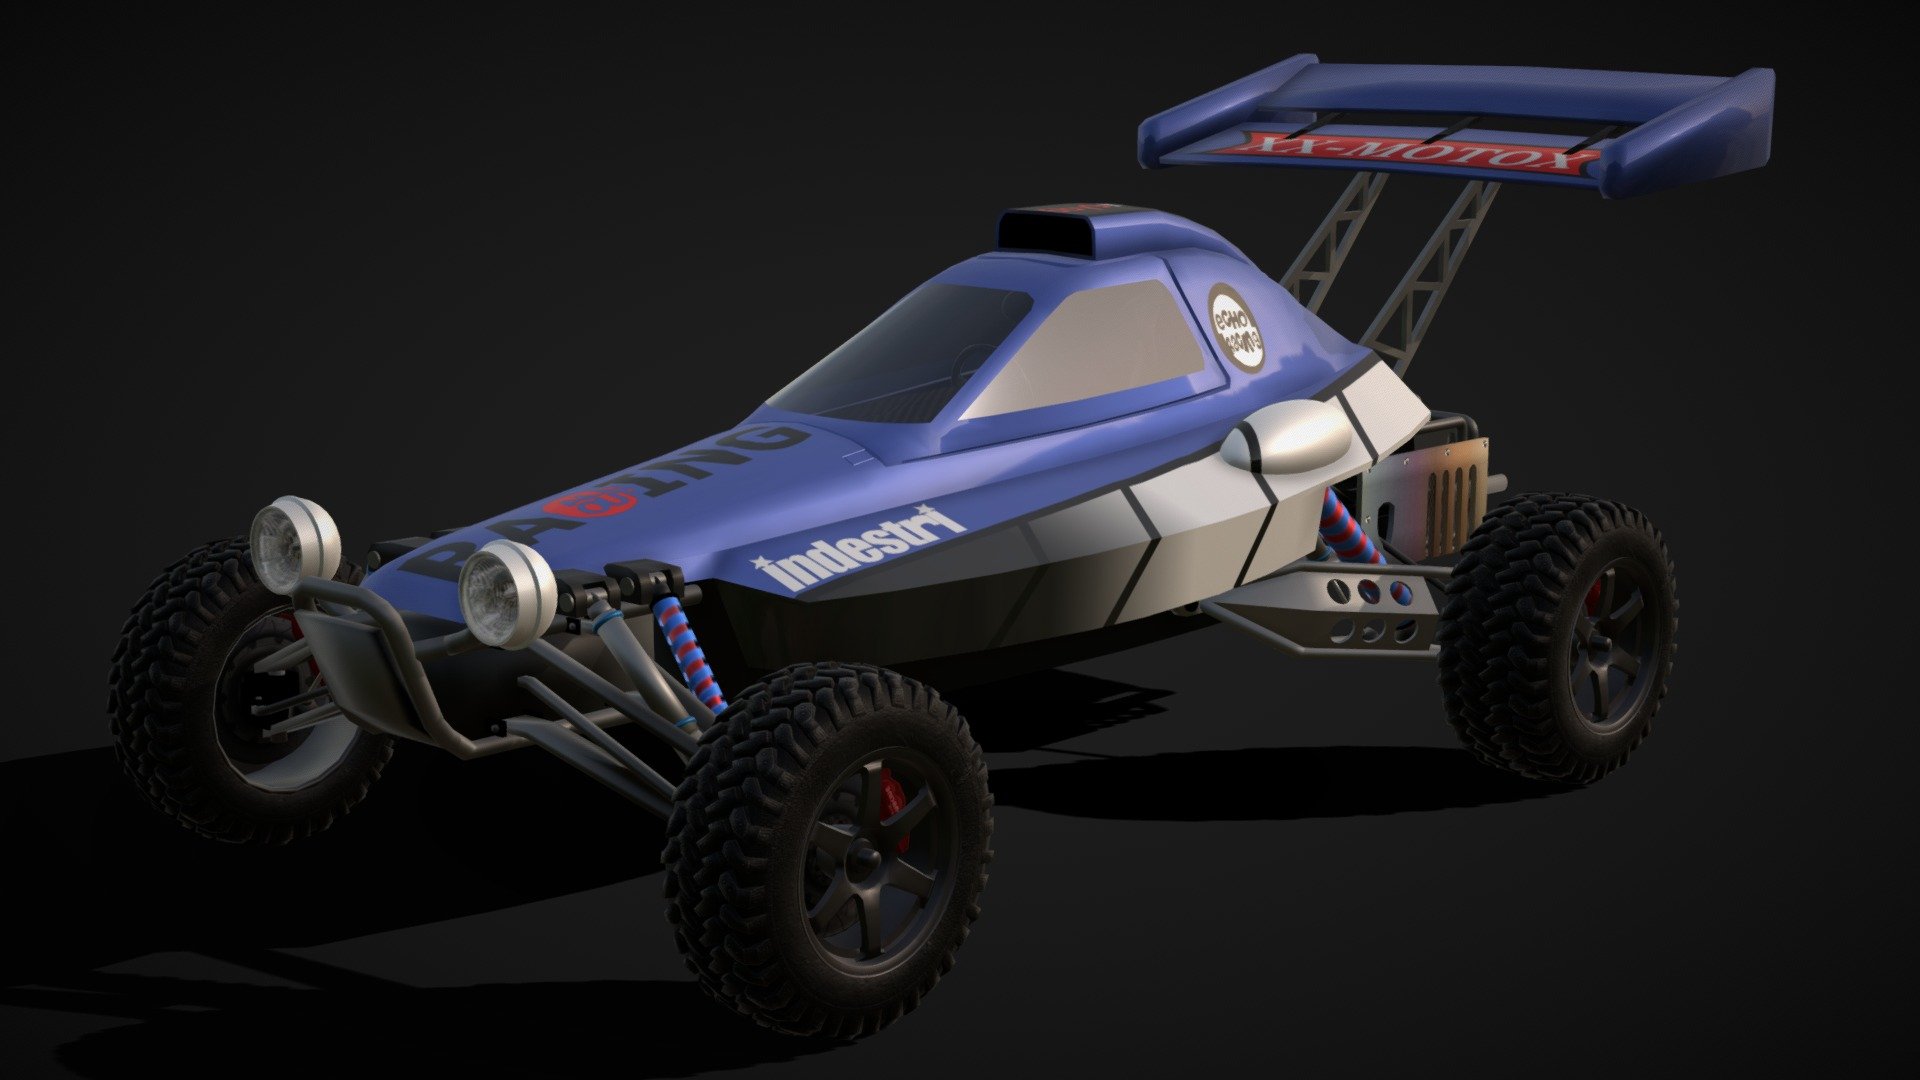 Jester Super BXR inspired from Motorstorm Monument-Valley.

This model is kept lowpoly and optimized for use in Videogames.

The supsension is connected really well so it makes it easy to animate  with simple up and down animations.

The Paintable layer is correctly UV mapped and comes with a additional Template to create Skins for it.

Textures come in PNG format.

Note: This model is not rigged!

Modell made using Blender 2.78 and Gimp 2.8 for painting the textures 3d model